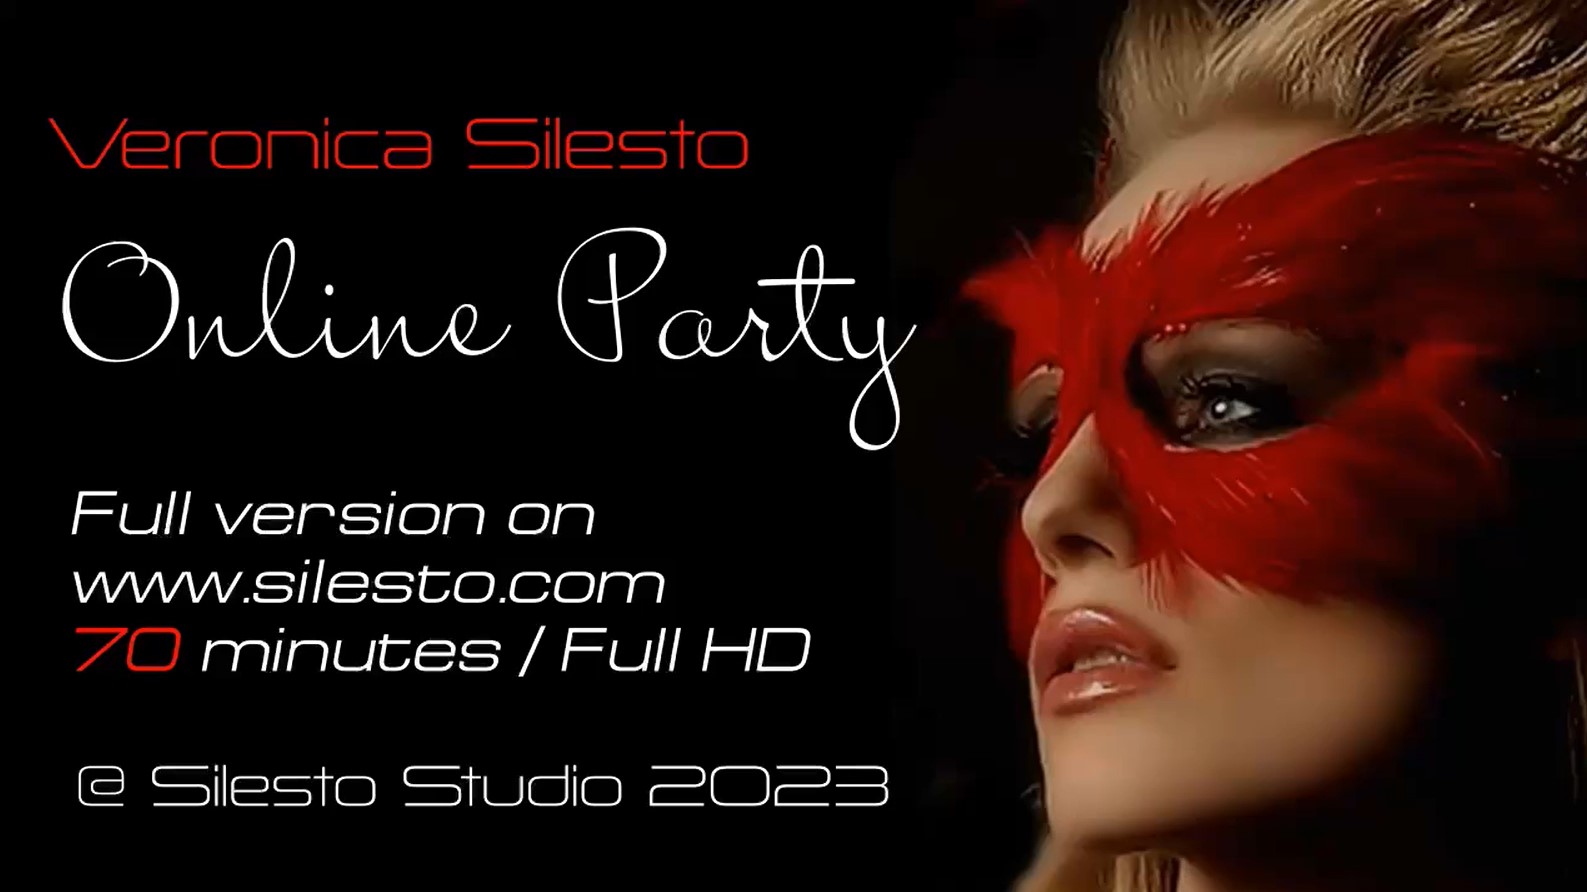 Veronica Silesto - Online Party in HD